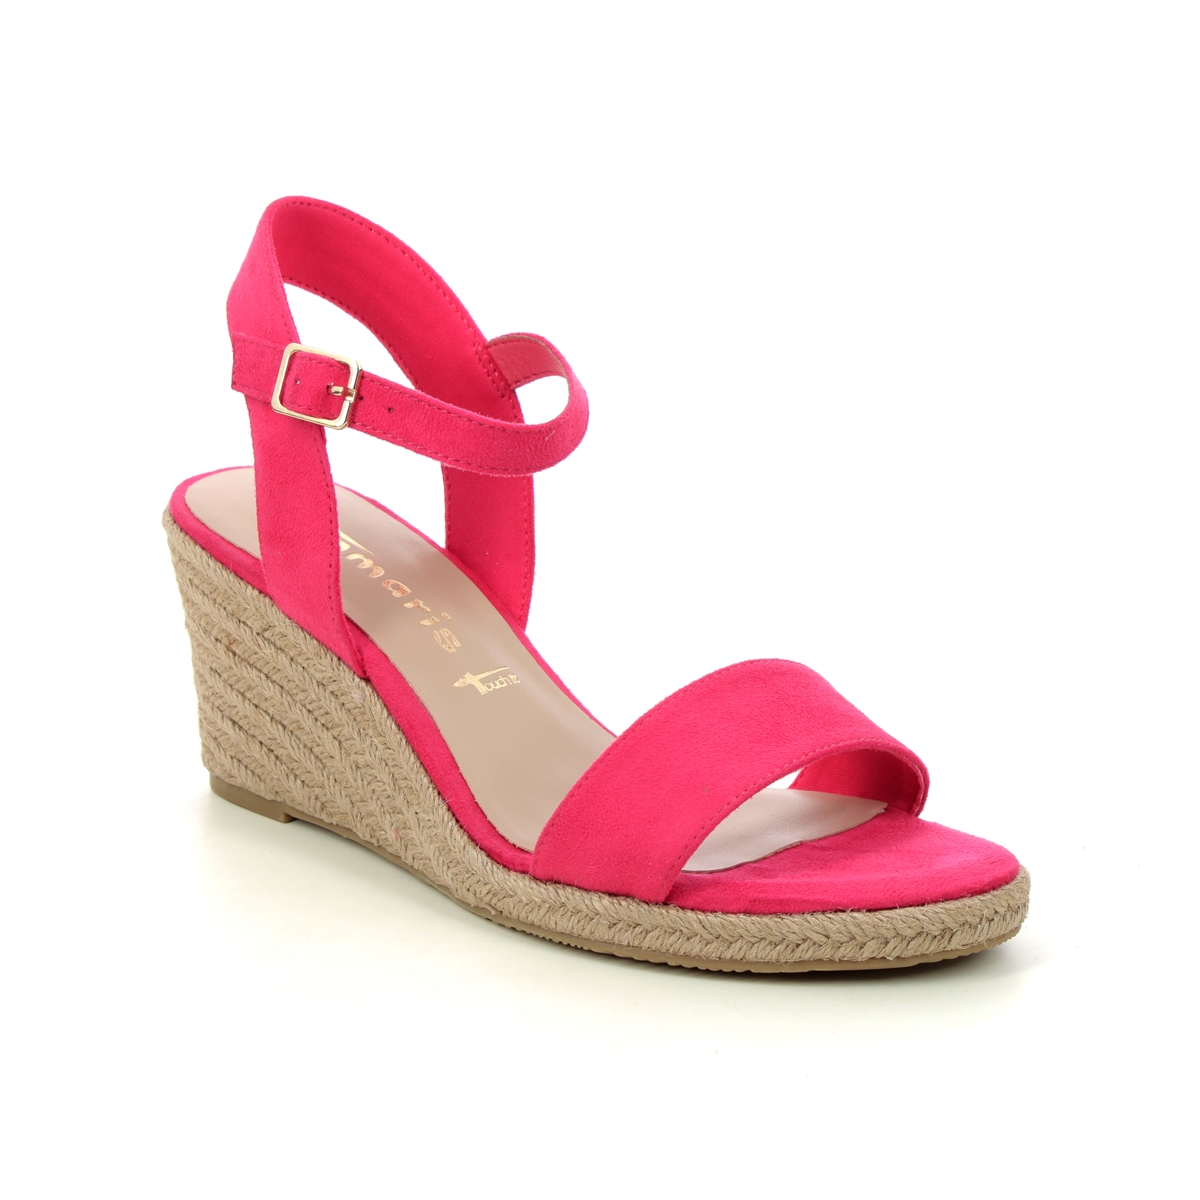 Tamaris Livia 91 Pink Womens Wedge Sandals 28300-42-510 in a Plain Textile in Size 37